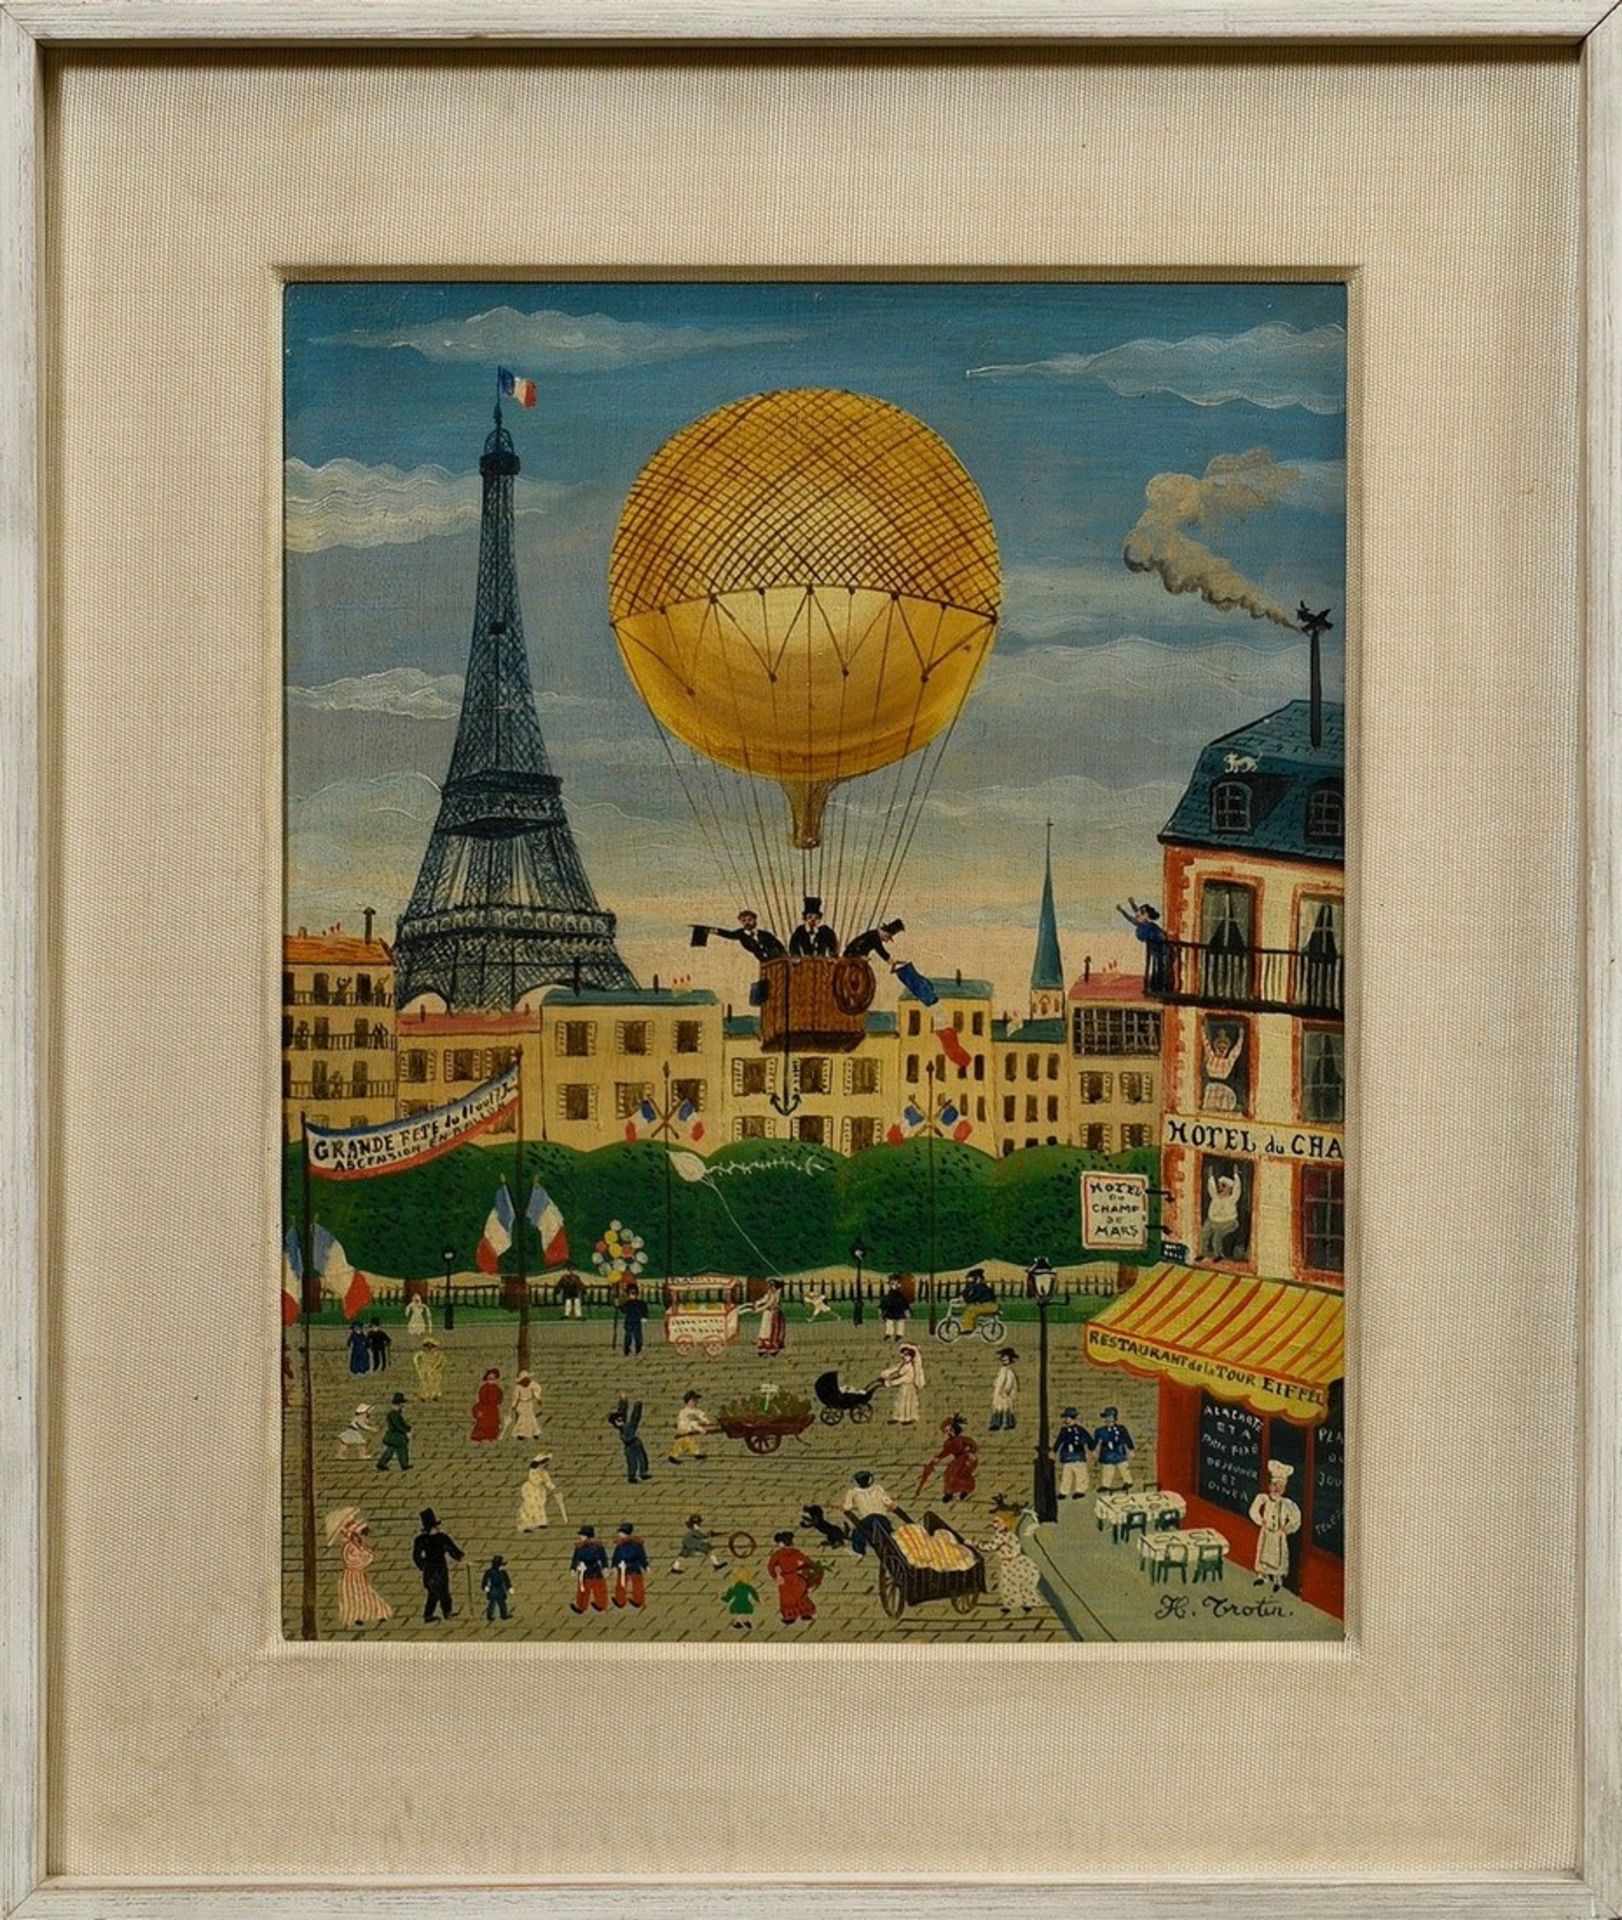 Trotin, Hector (1894-1966) "Balloon over Paris", oil/wood, b.r. sign., verso adhesive label "Kunsth - Image 2 of 5